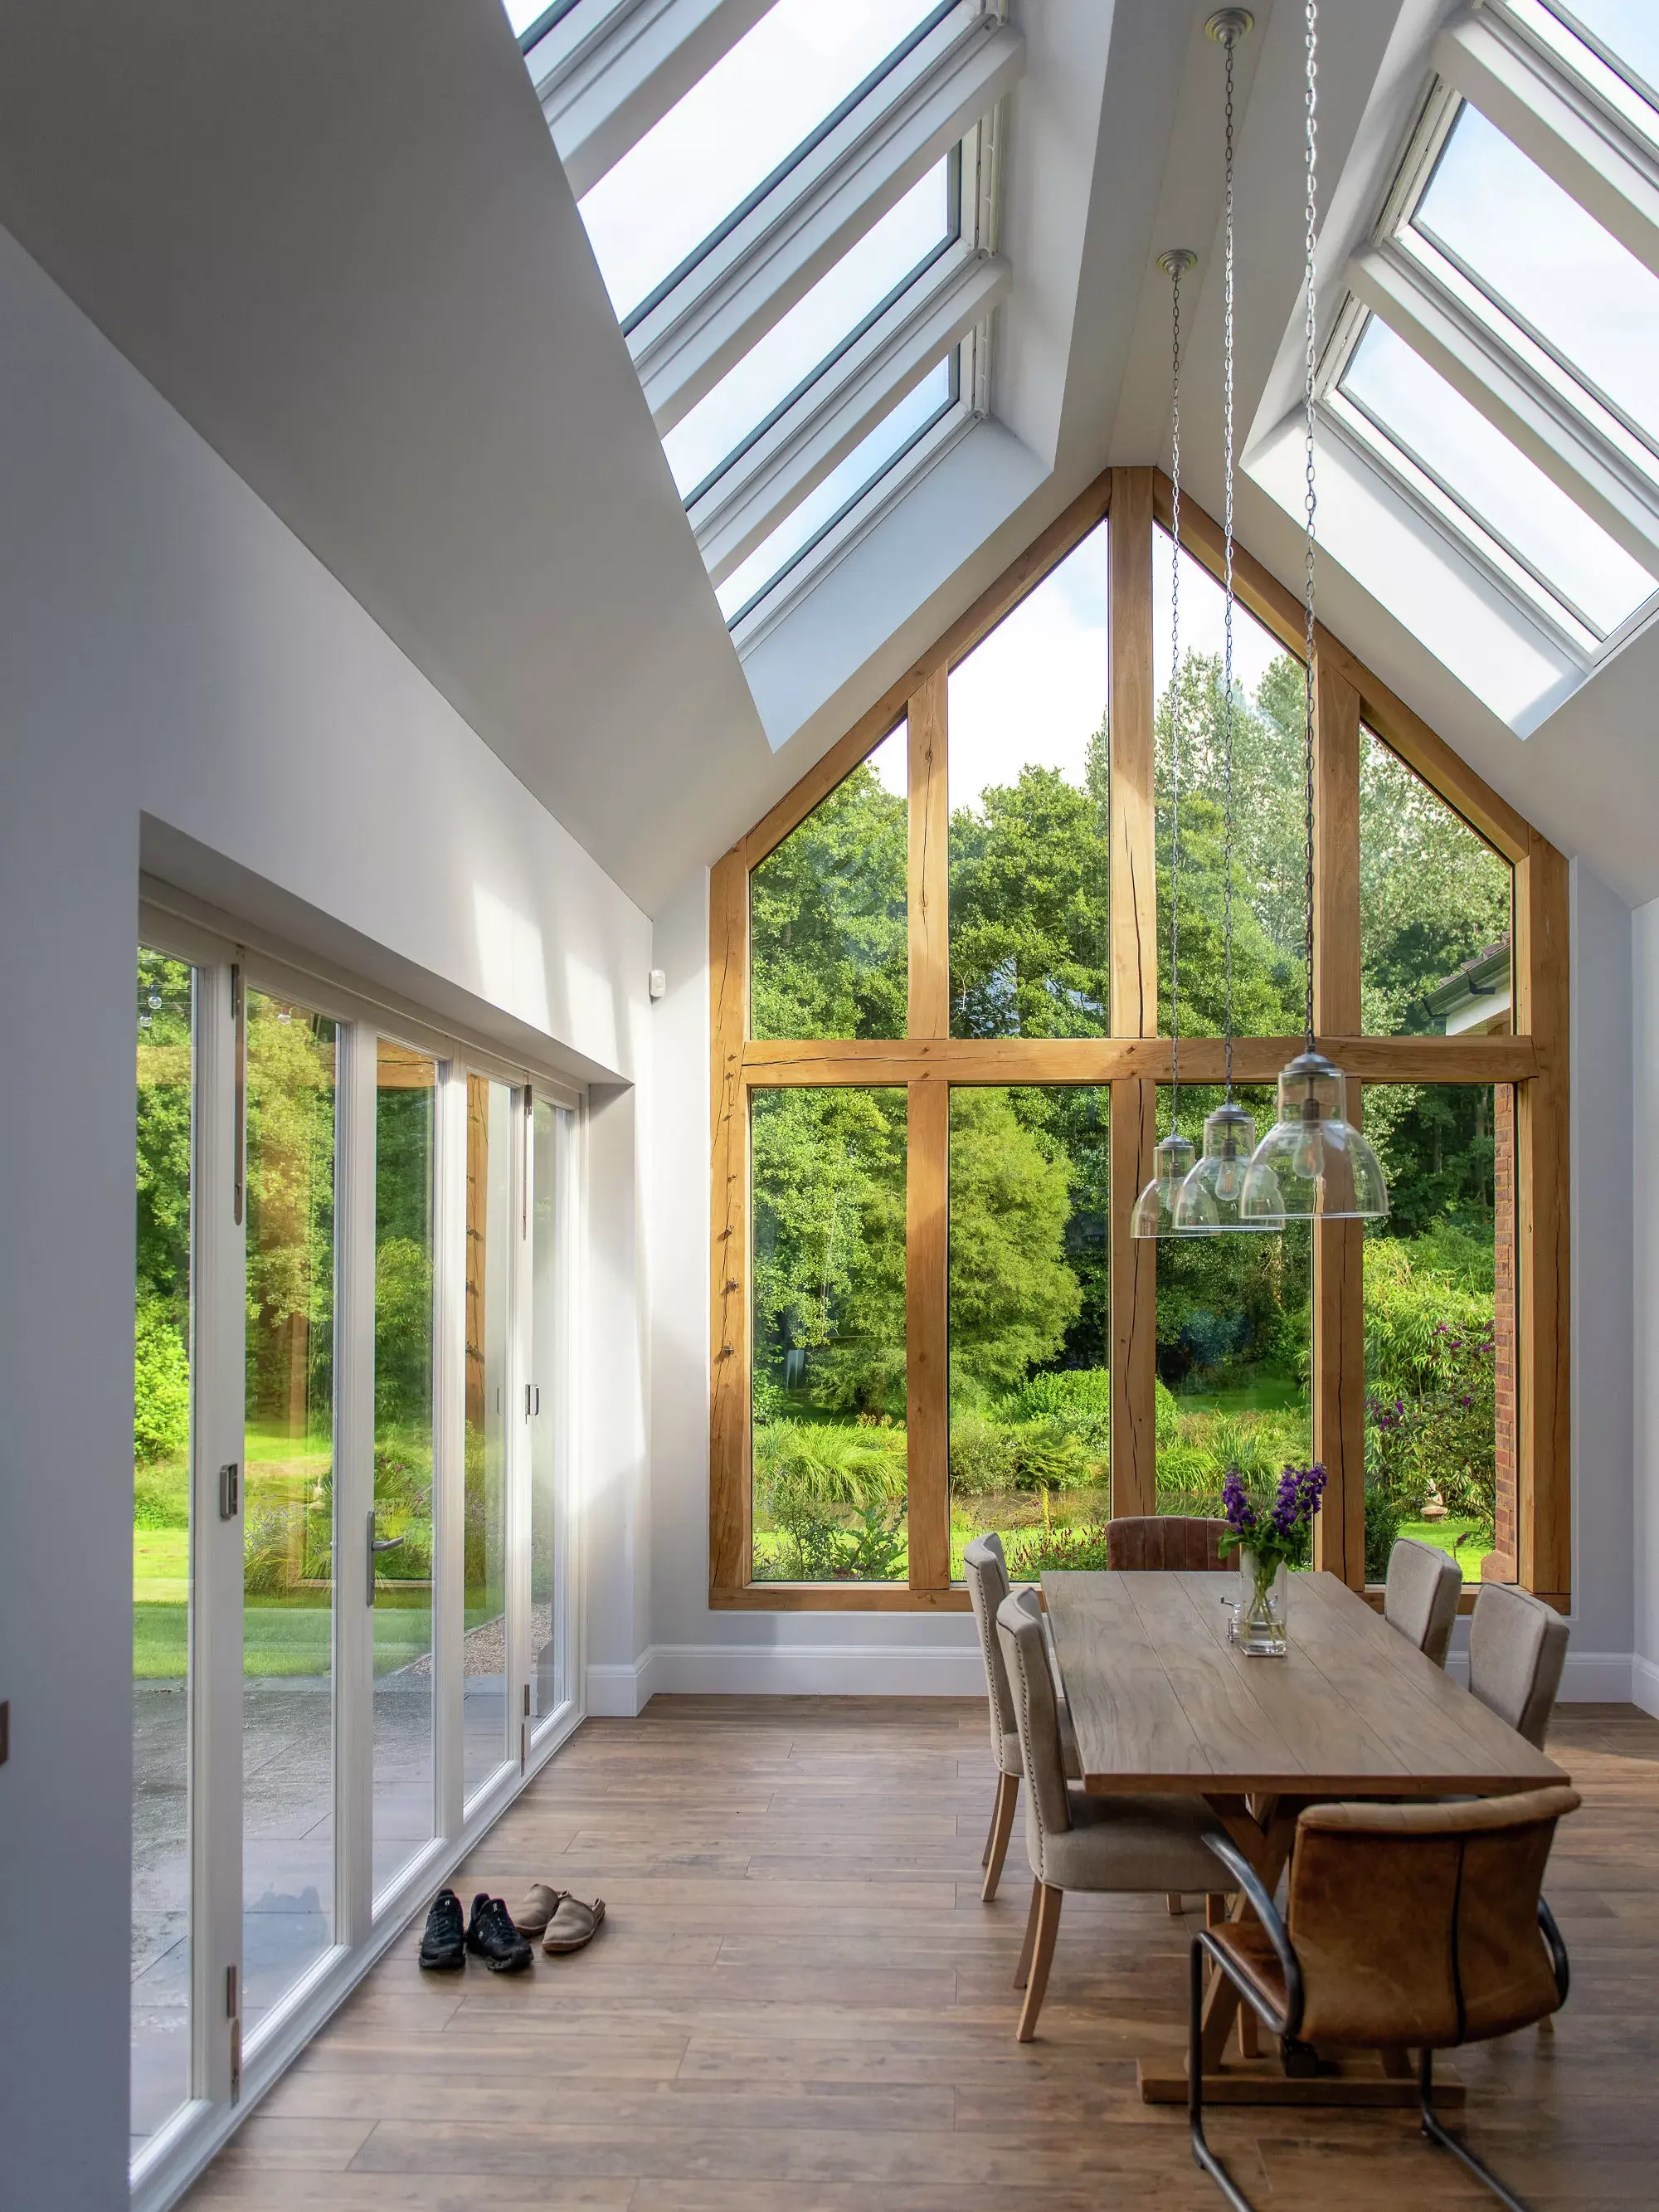 Spacious dining room with VELUX roof windows and garden view through glass doors.